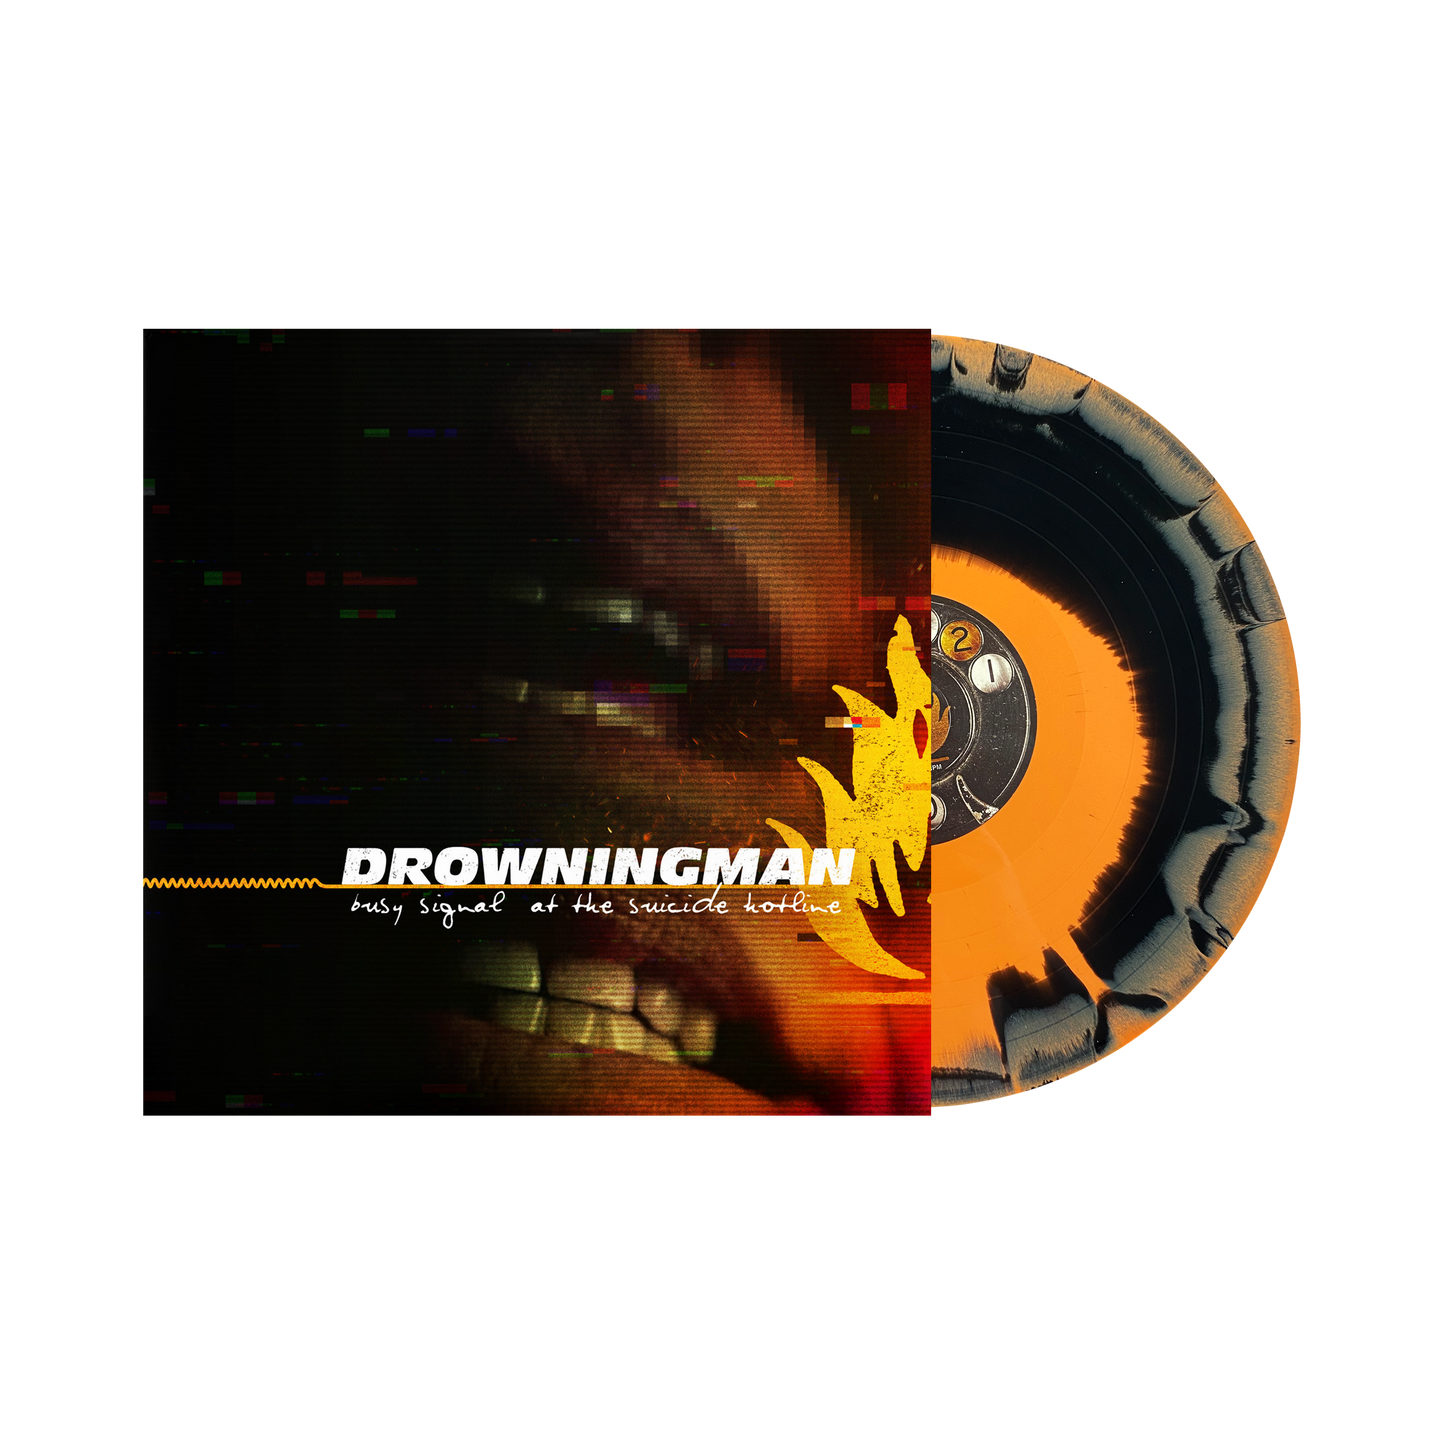 Drowningman "Busy Signal At The Suicide Hotline" LP